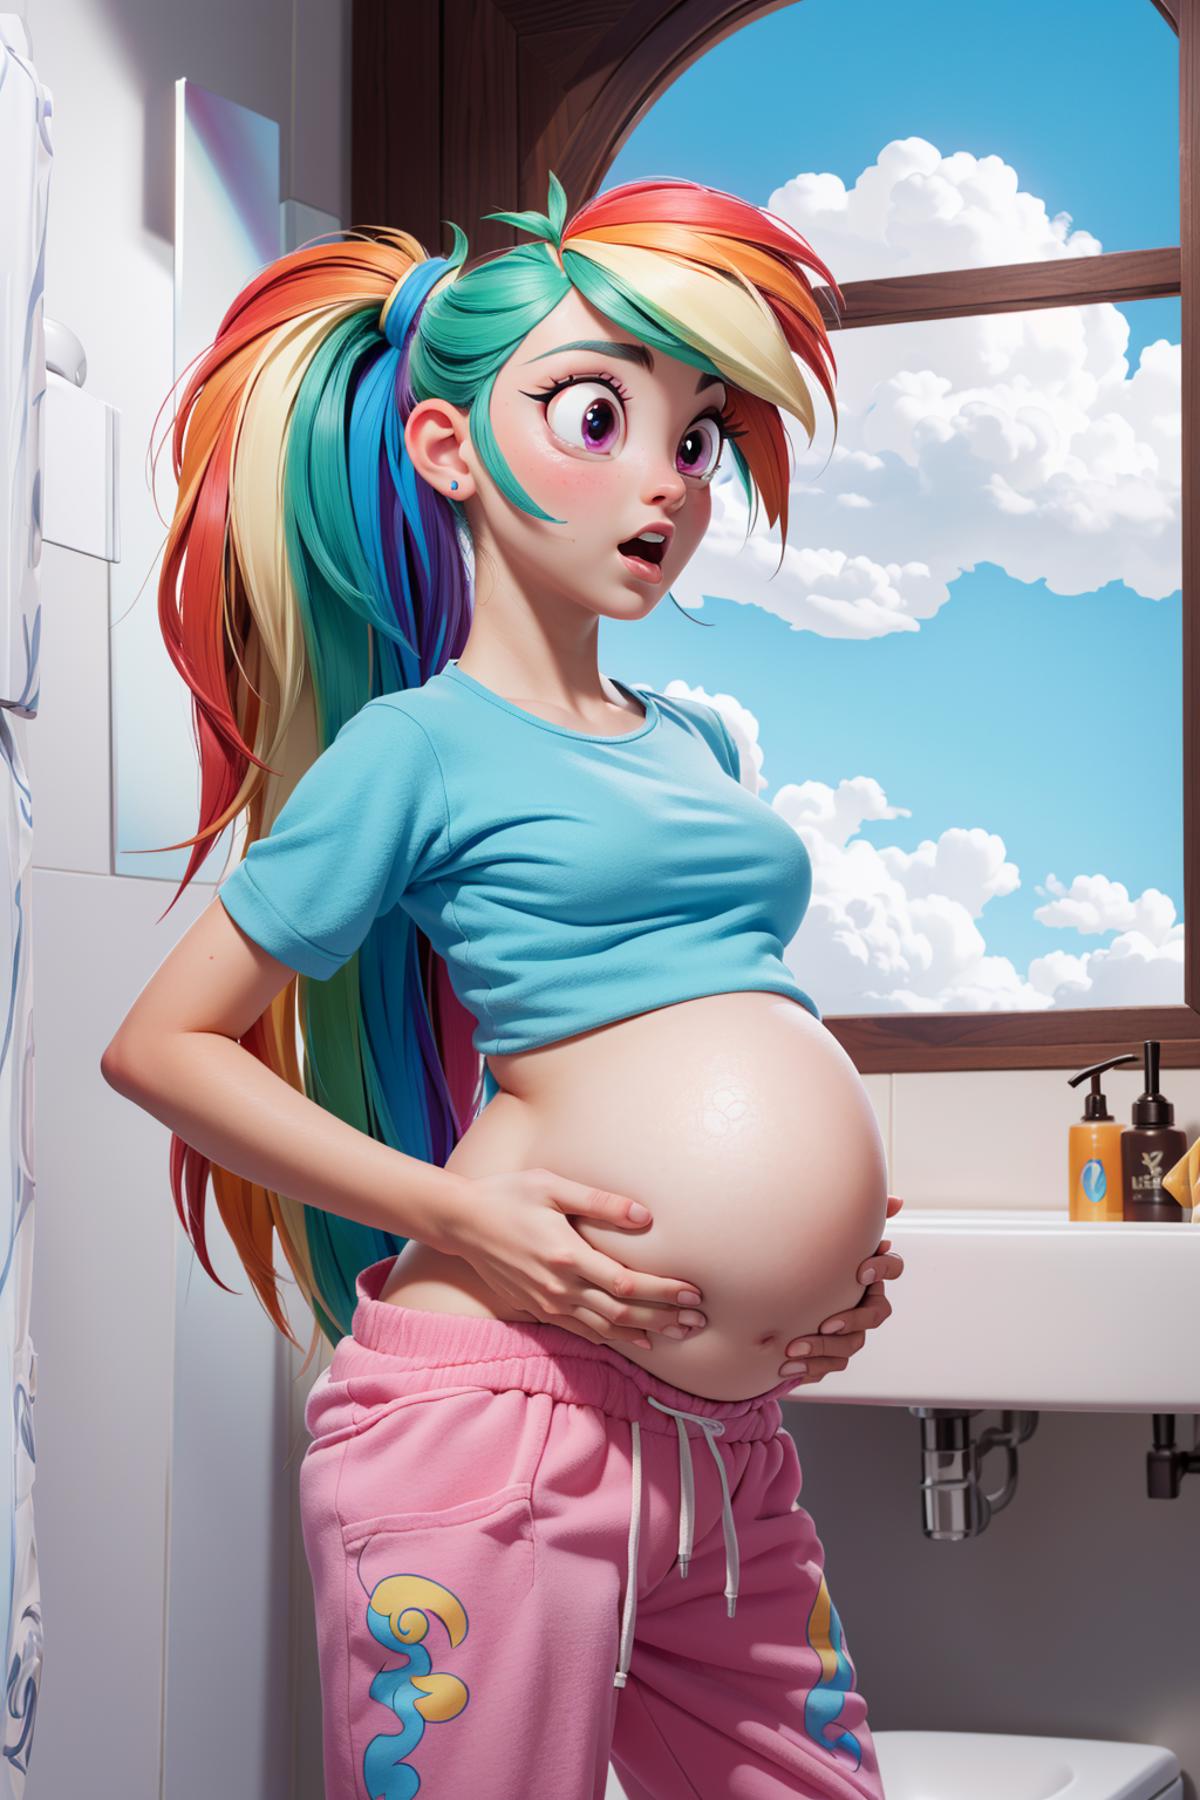 A pregnant cartoon character with pink hair and pink pants.